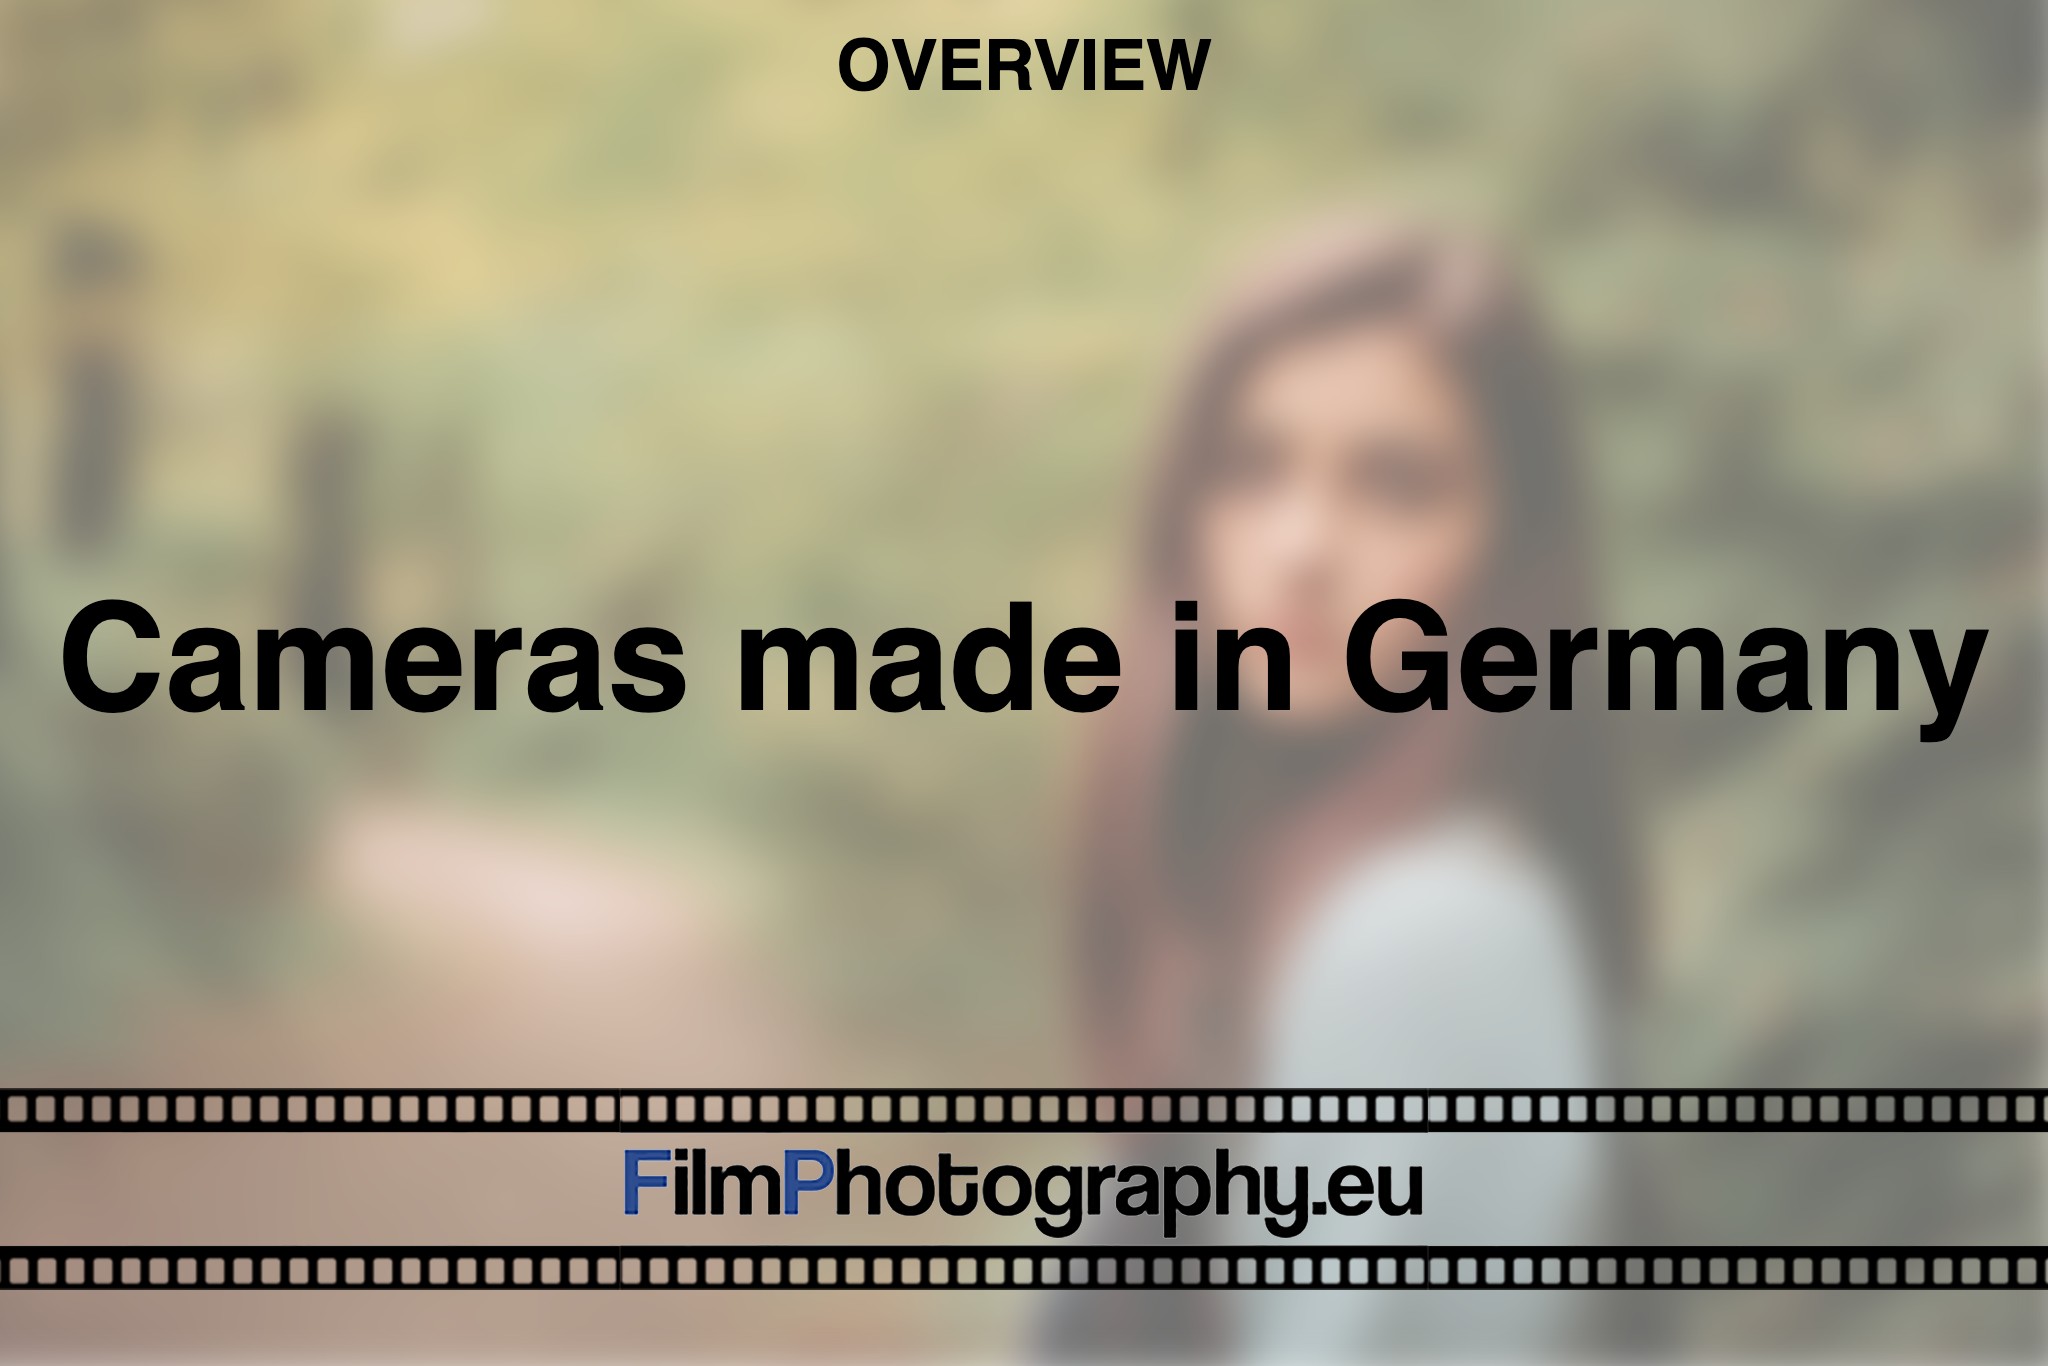 cameras-made-in-Germany-production-factory-photo-bnv